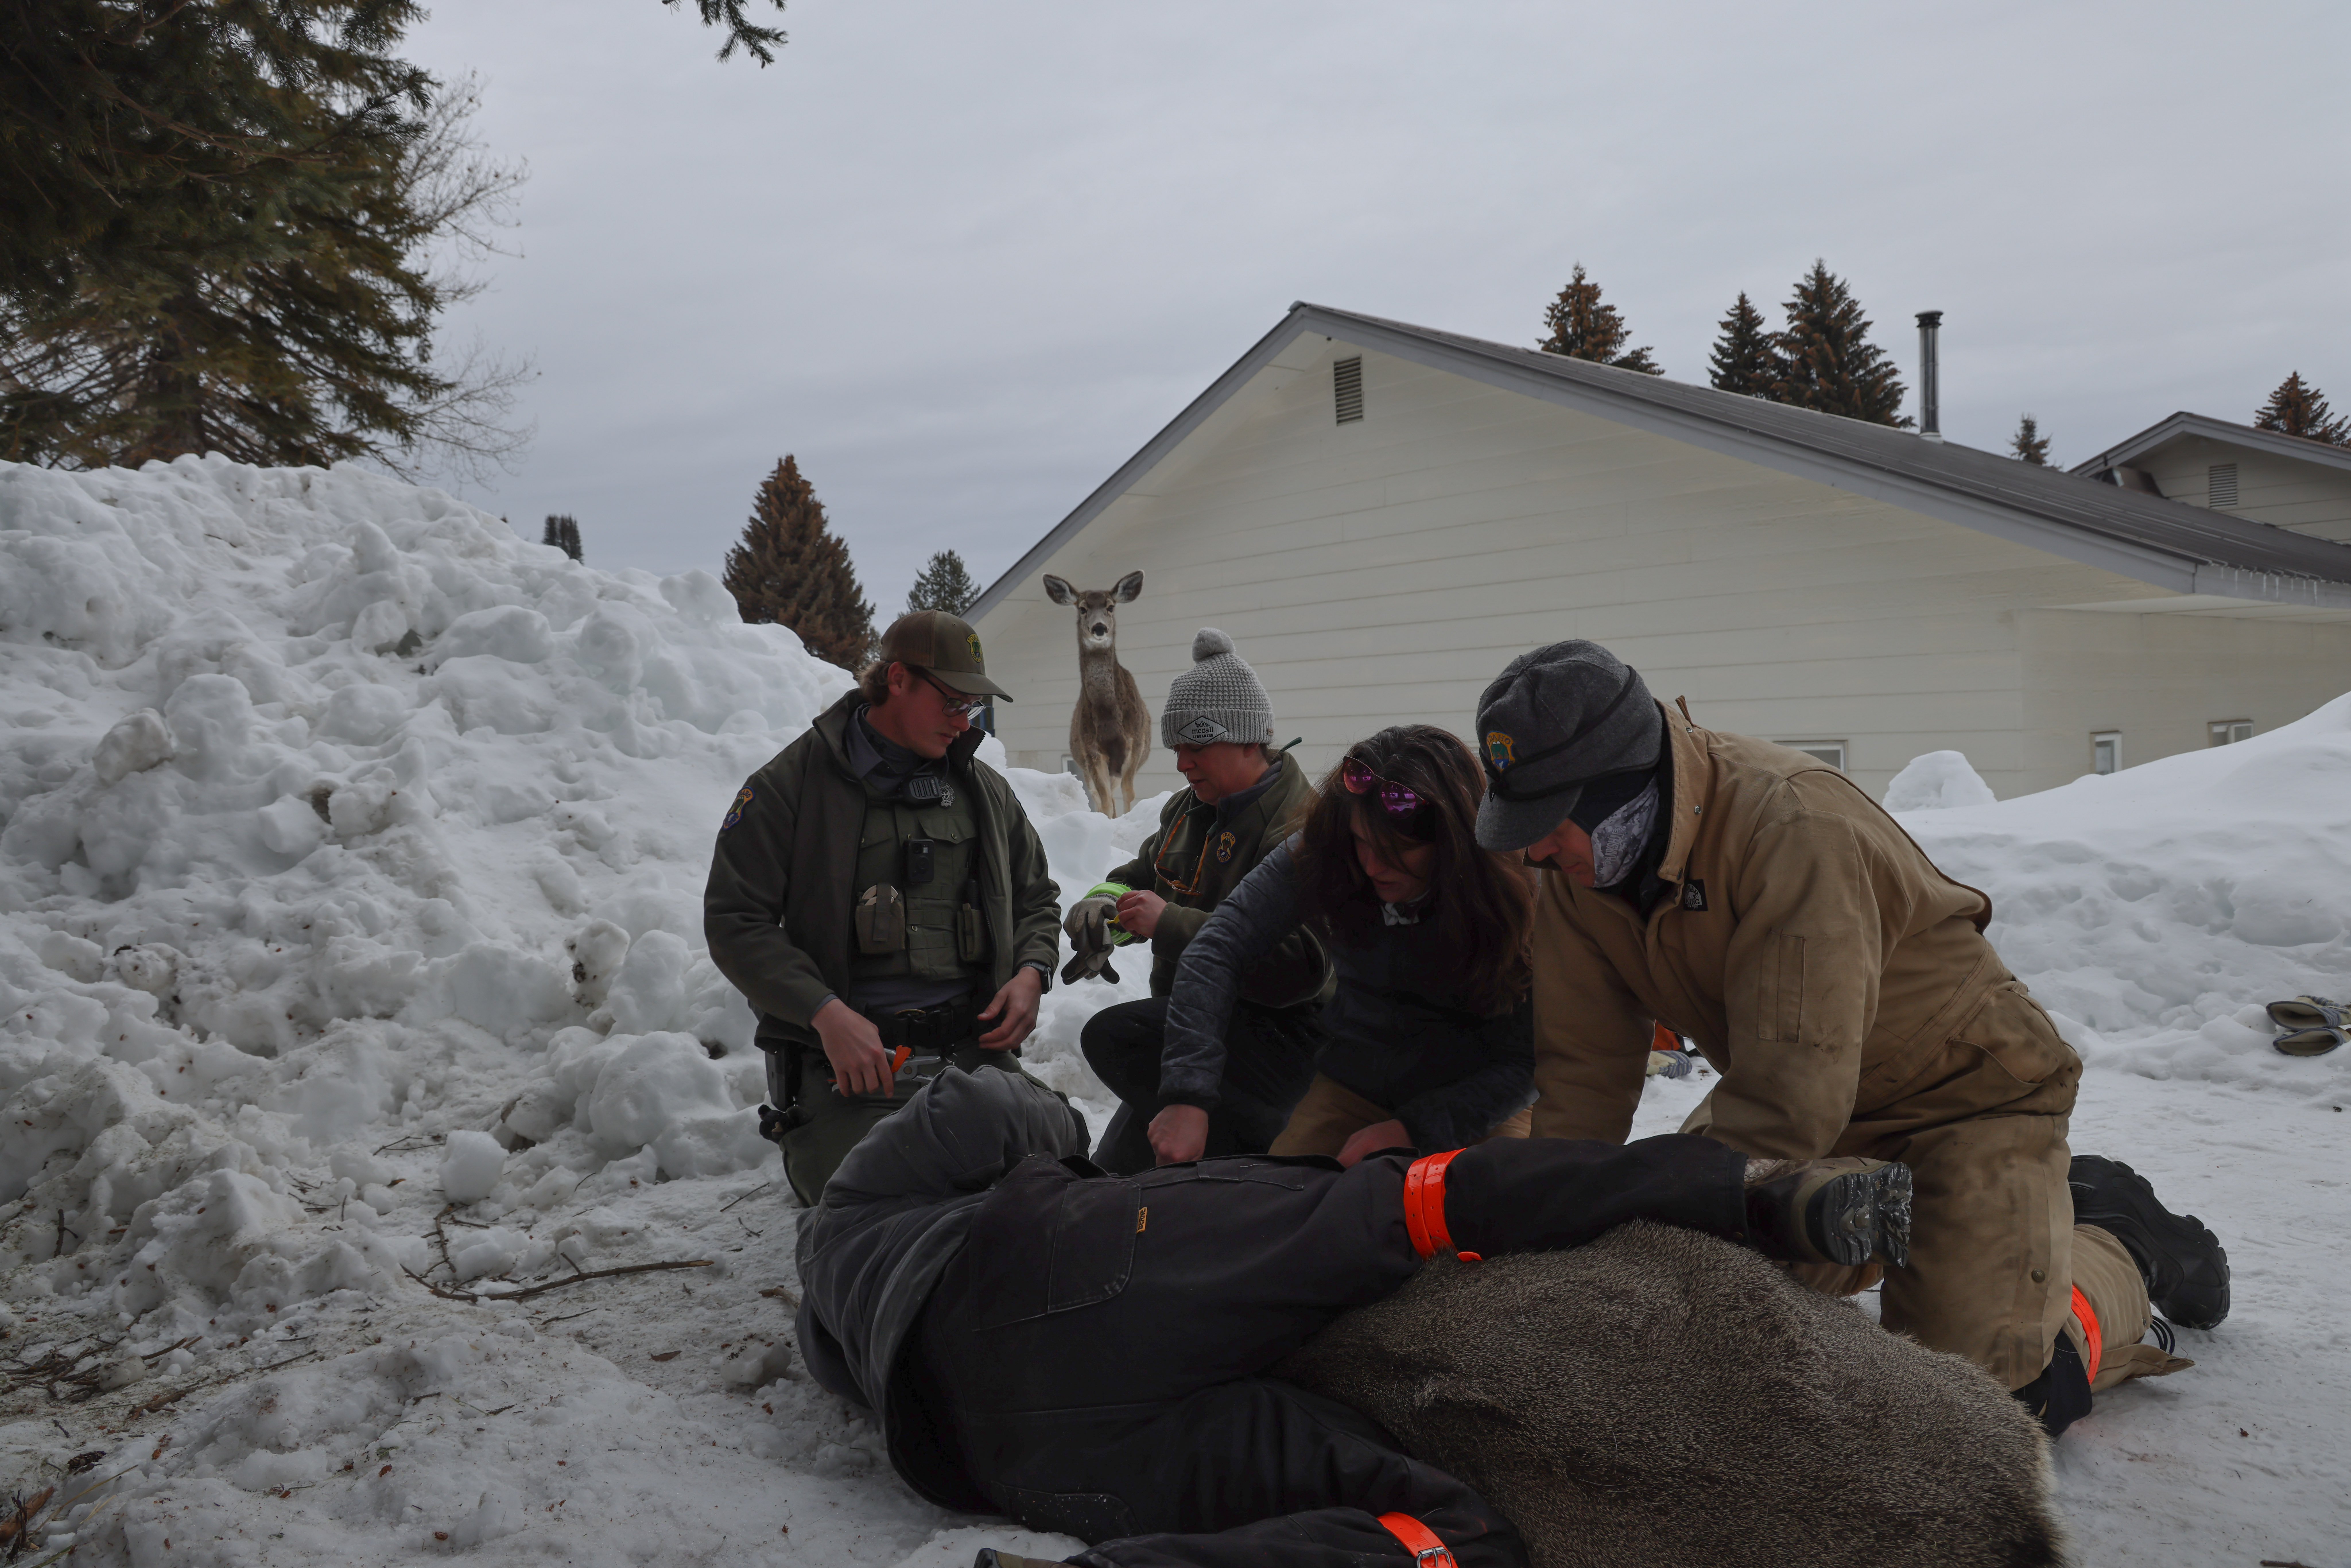 Fish and Game biologists examine a deer that was trapped in Cascade for health issues while another deer looks on.